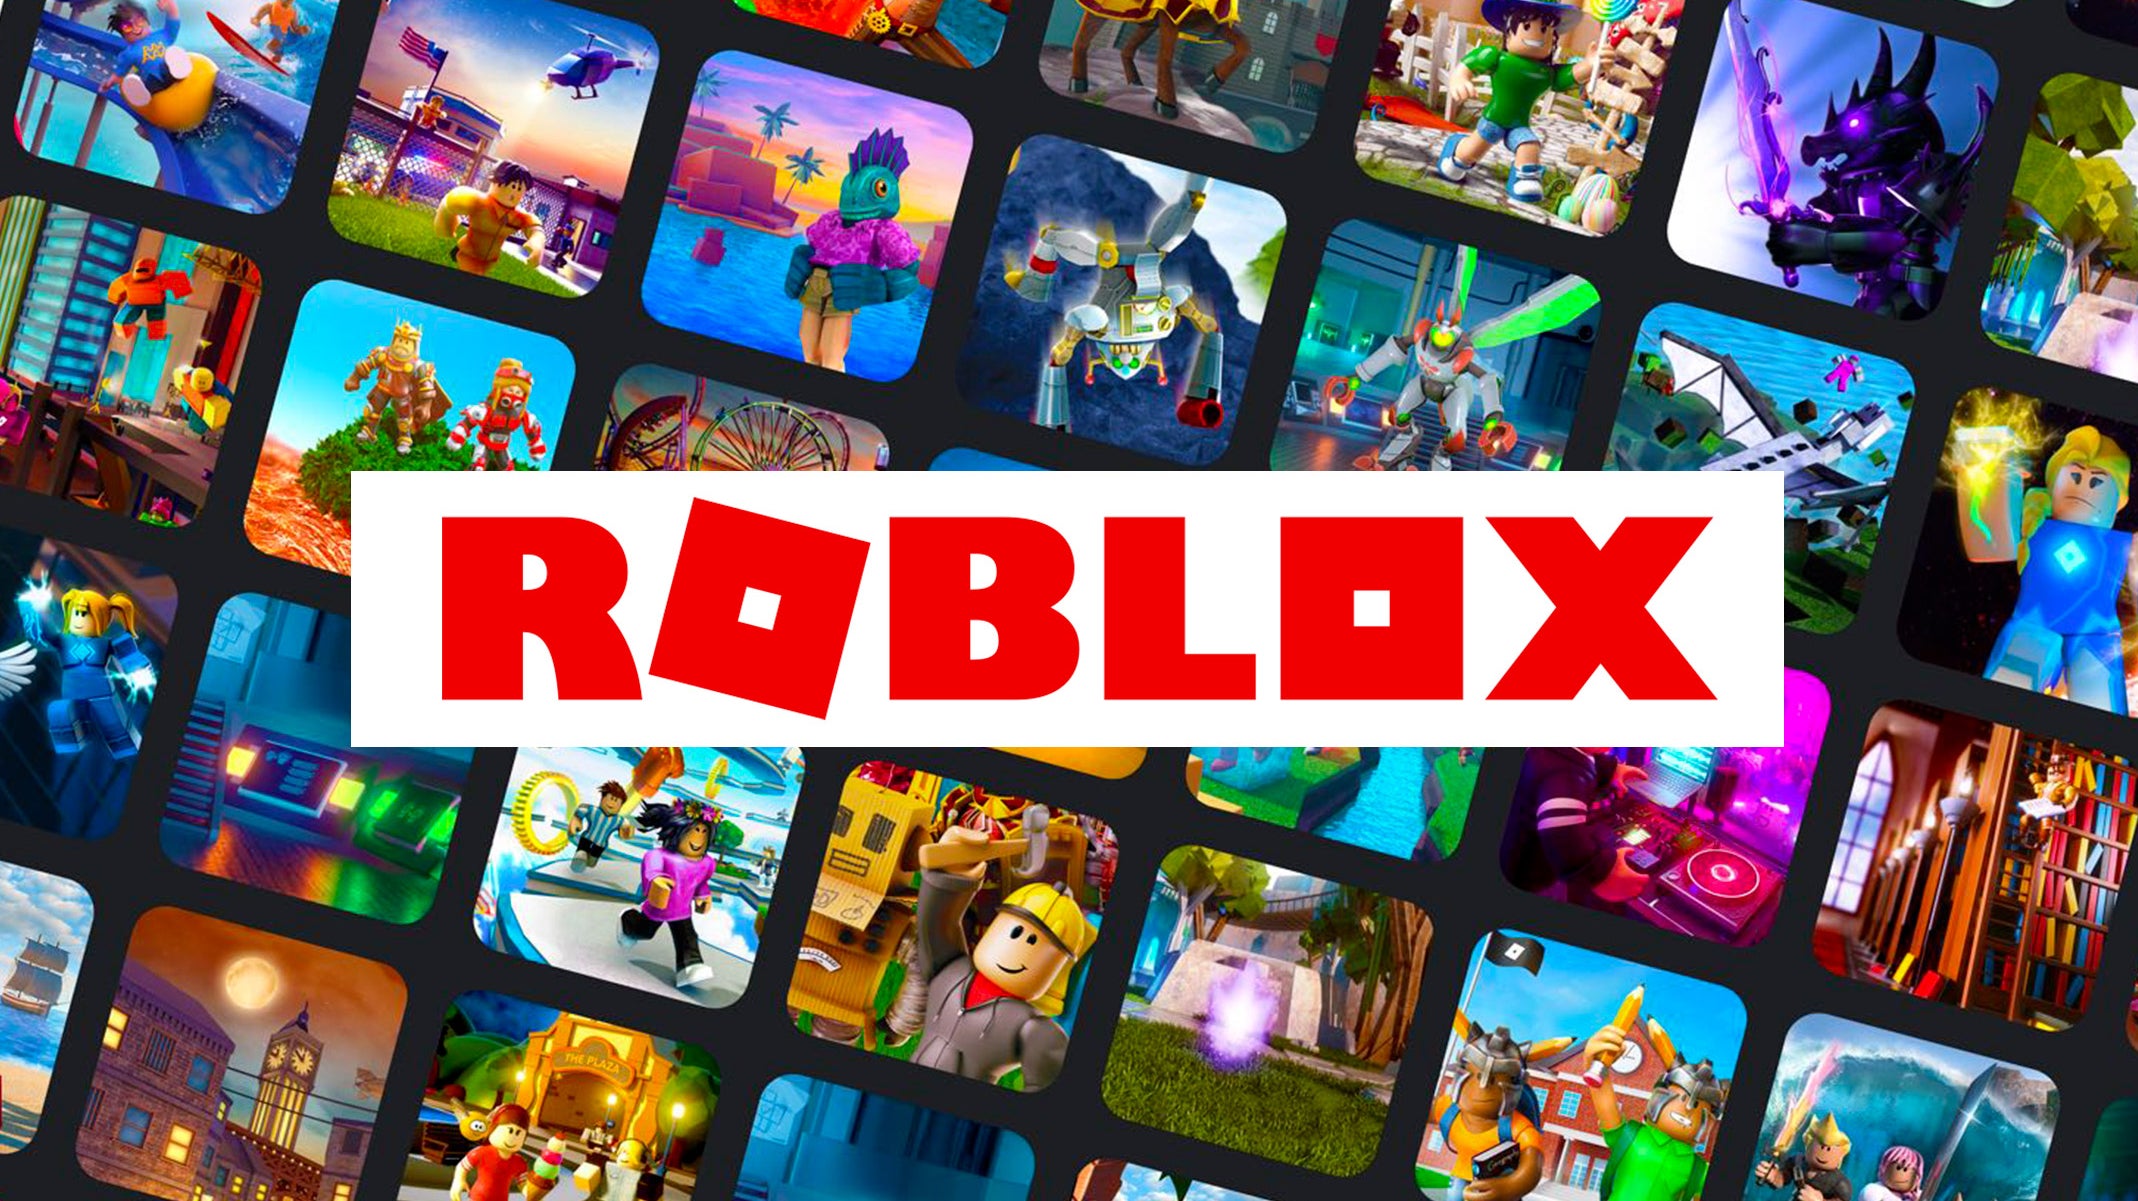 Image for BBC report suggests Roblox has an issue with sexually explicit content